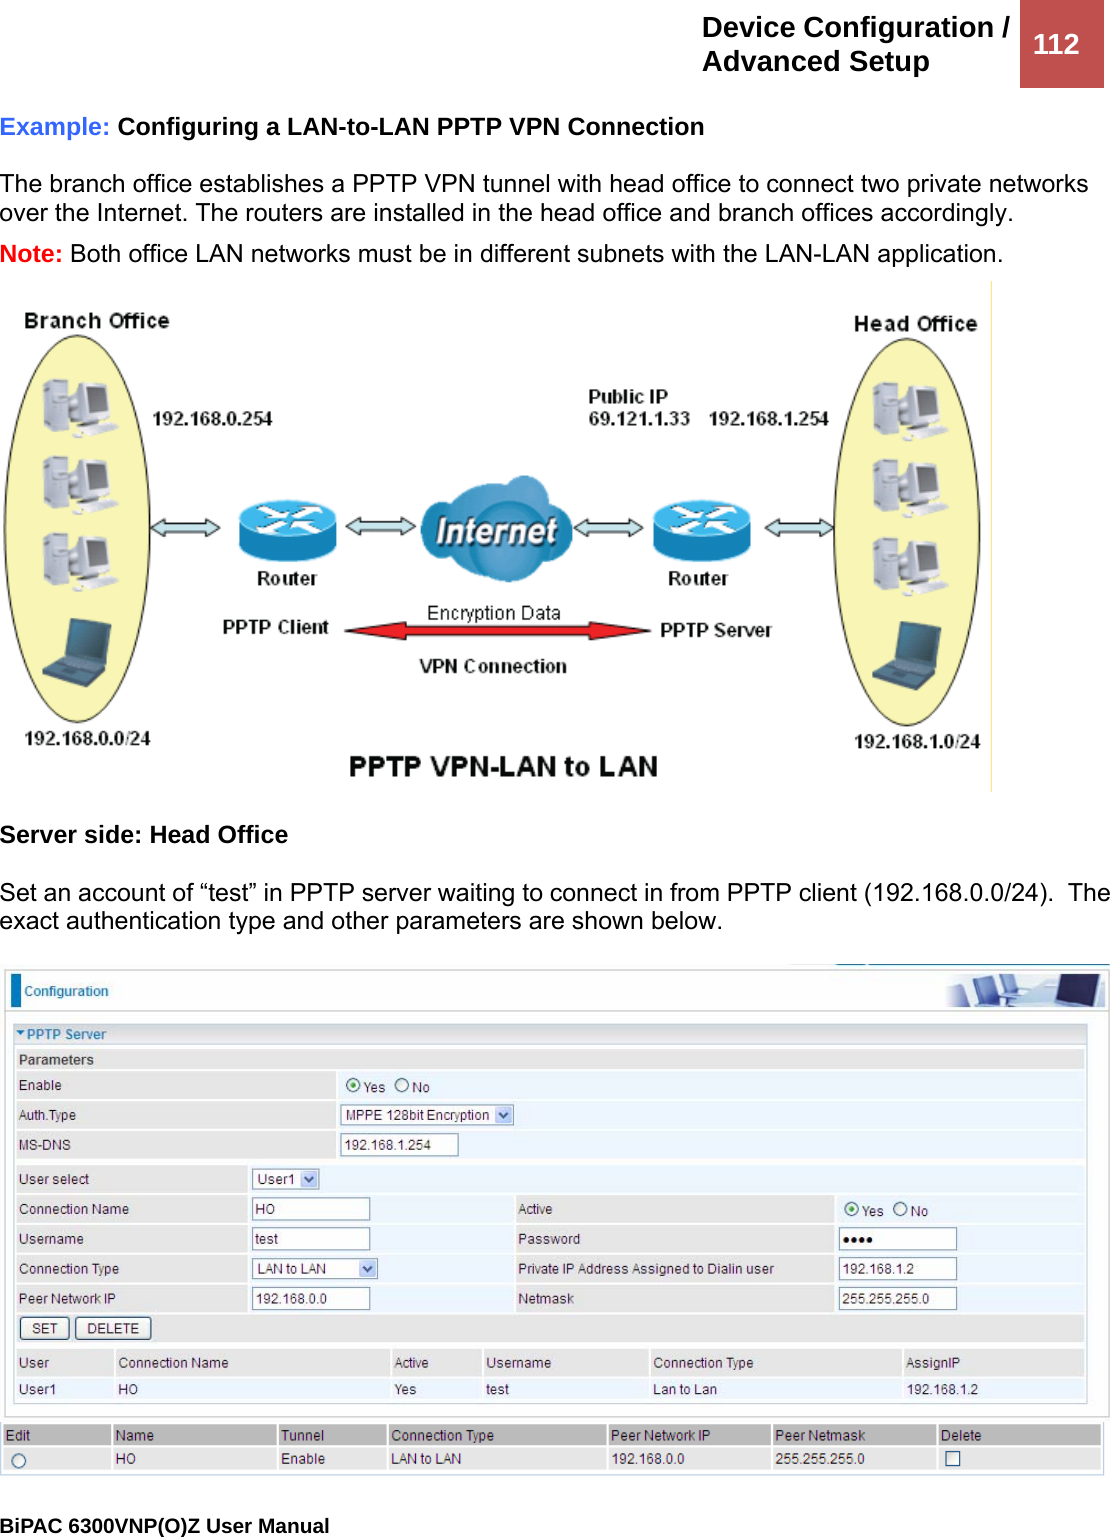 Device Configuration /Advanced Setup  112                                                BiPAC 6300VNP(O)Z User Manual  Example: Configuring a LAN-to-LAN PPTP VPN Connection  The branch office establishes a PPTP VPN tunnel with head office to connect two private networks over the Internet. The routers are installed in the head office and branch offices accordingly. Note: Both office LAN networks must be in different subnets with the LAN-LAN application.   Server side: Head Office  Set an account of “test” in PPTP server waiting to connect in from PPTP client (192.168.0.0/24).  The exact authentication type and other parameters are shown below.   